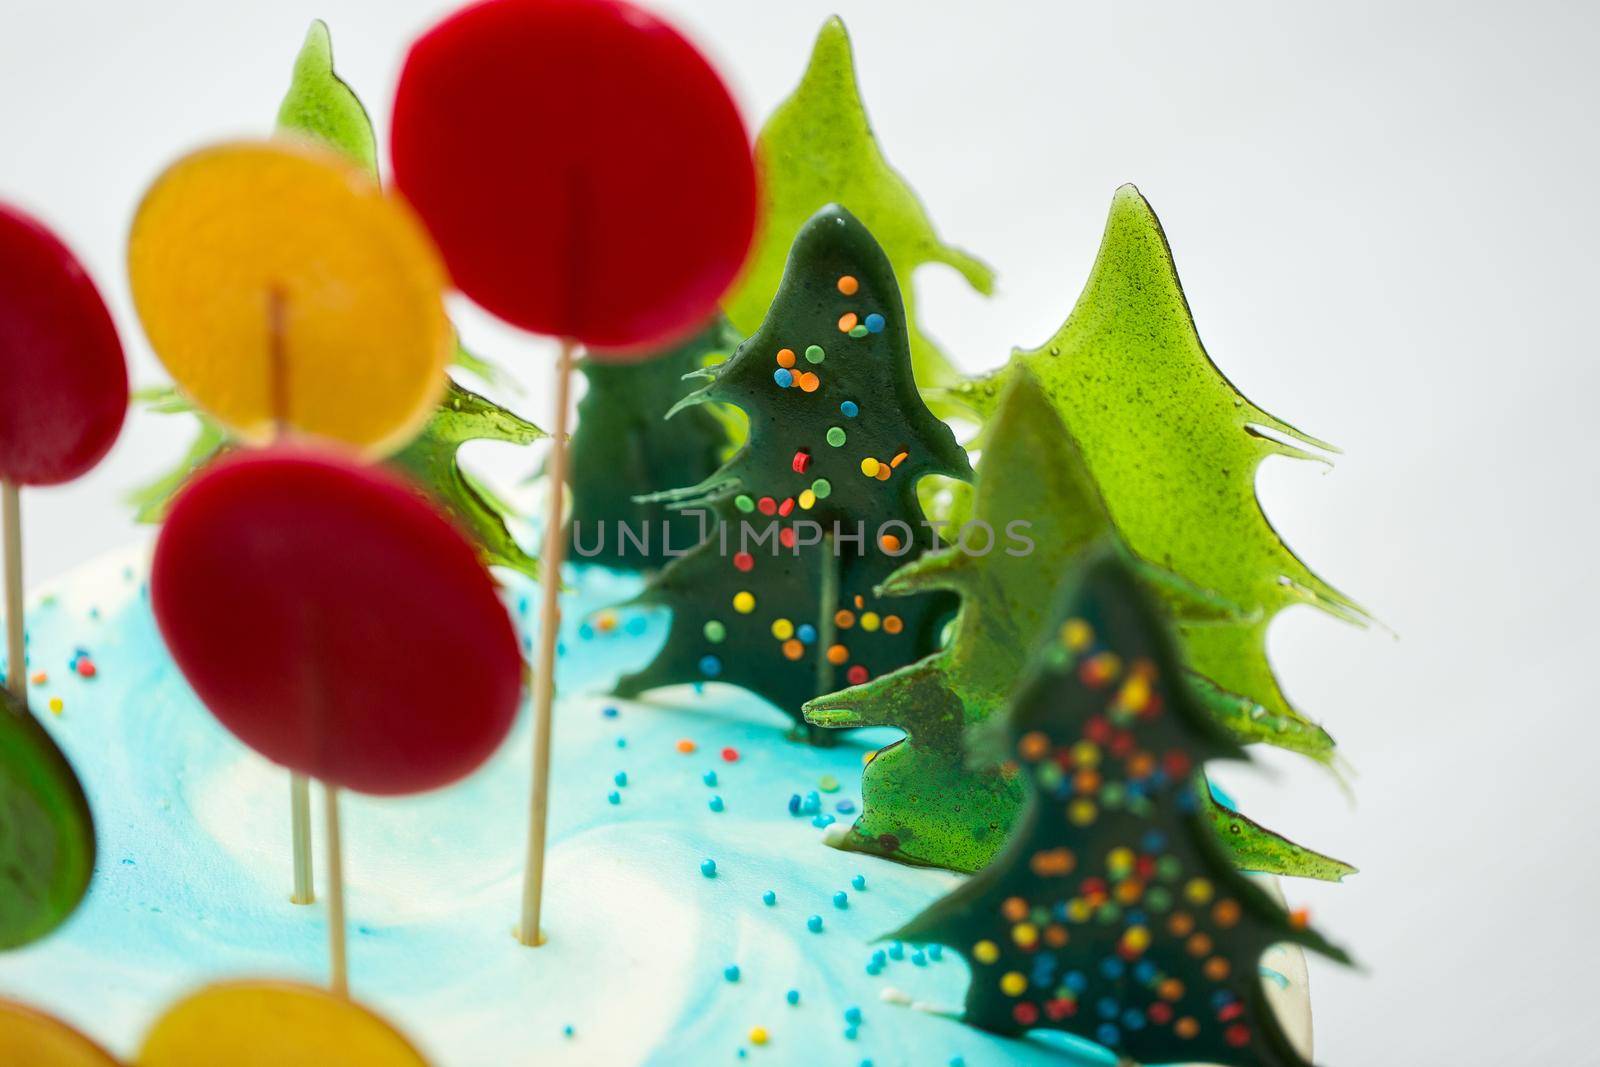 Lollipops are round and shaped like a Christmas tree on a cake by StudioPeace